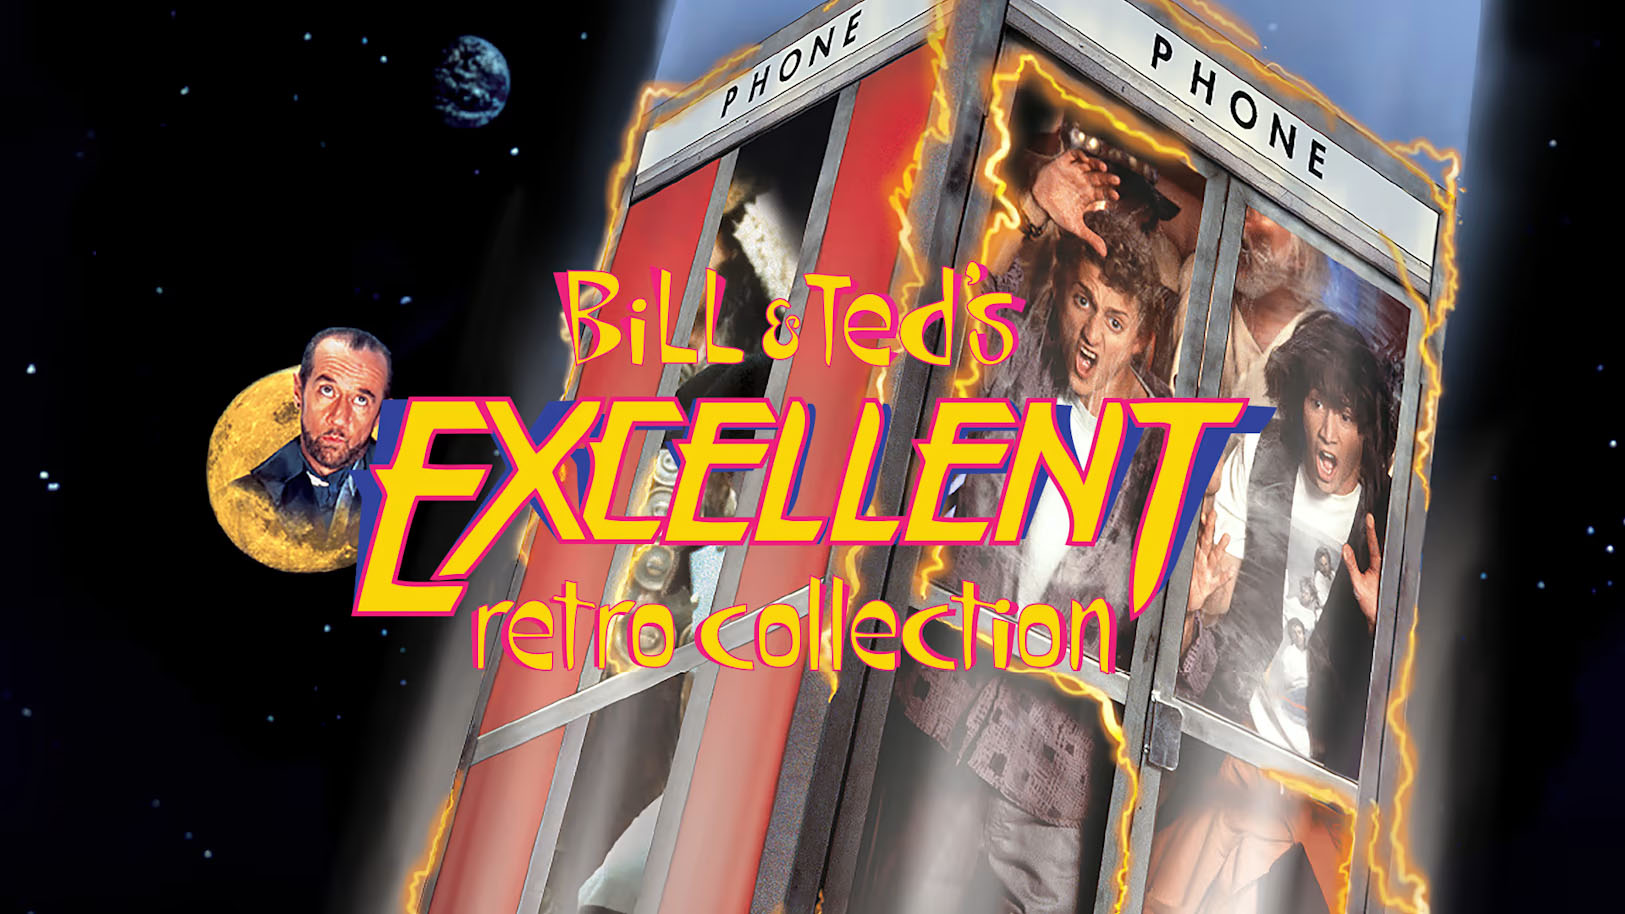 Bill & Ted’s Excellent Retro Collection